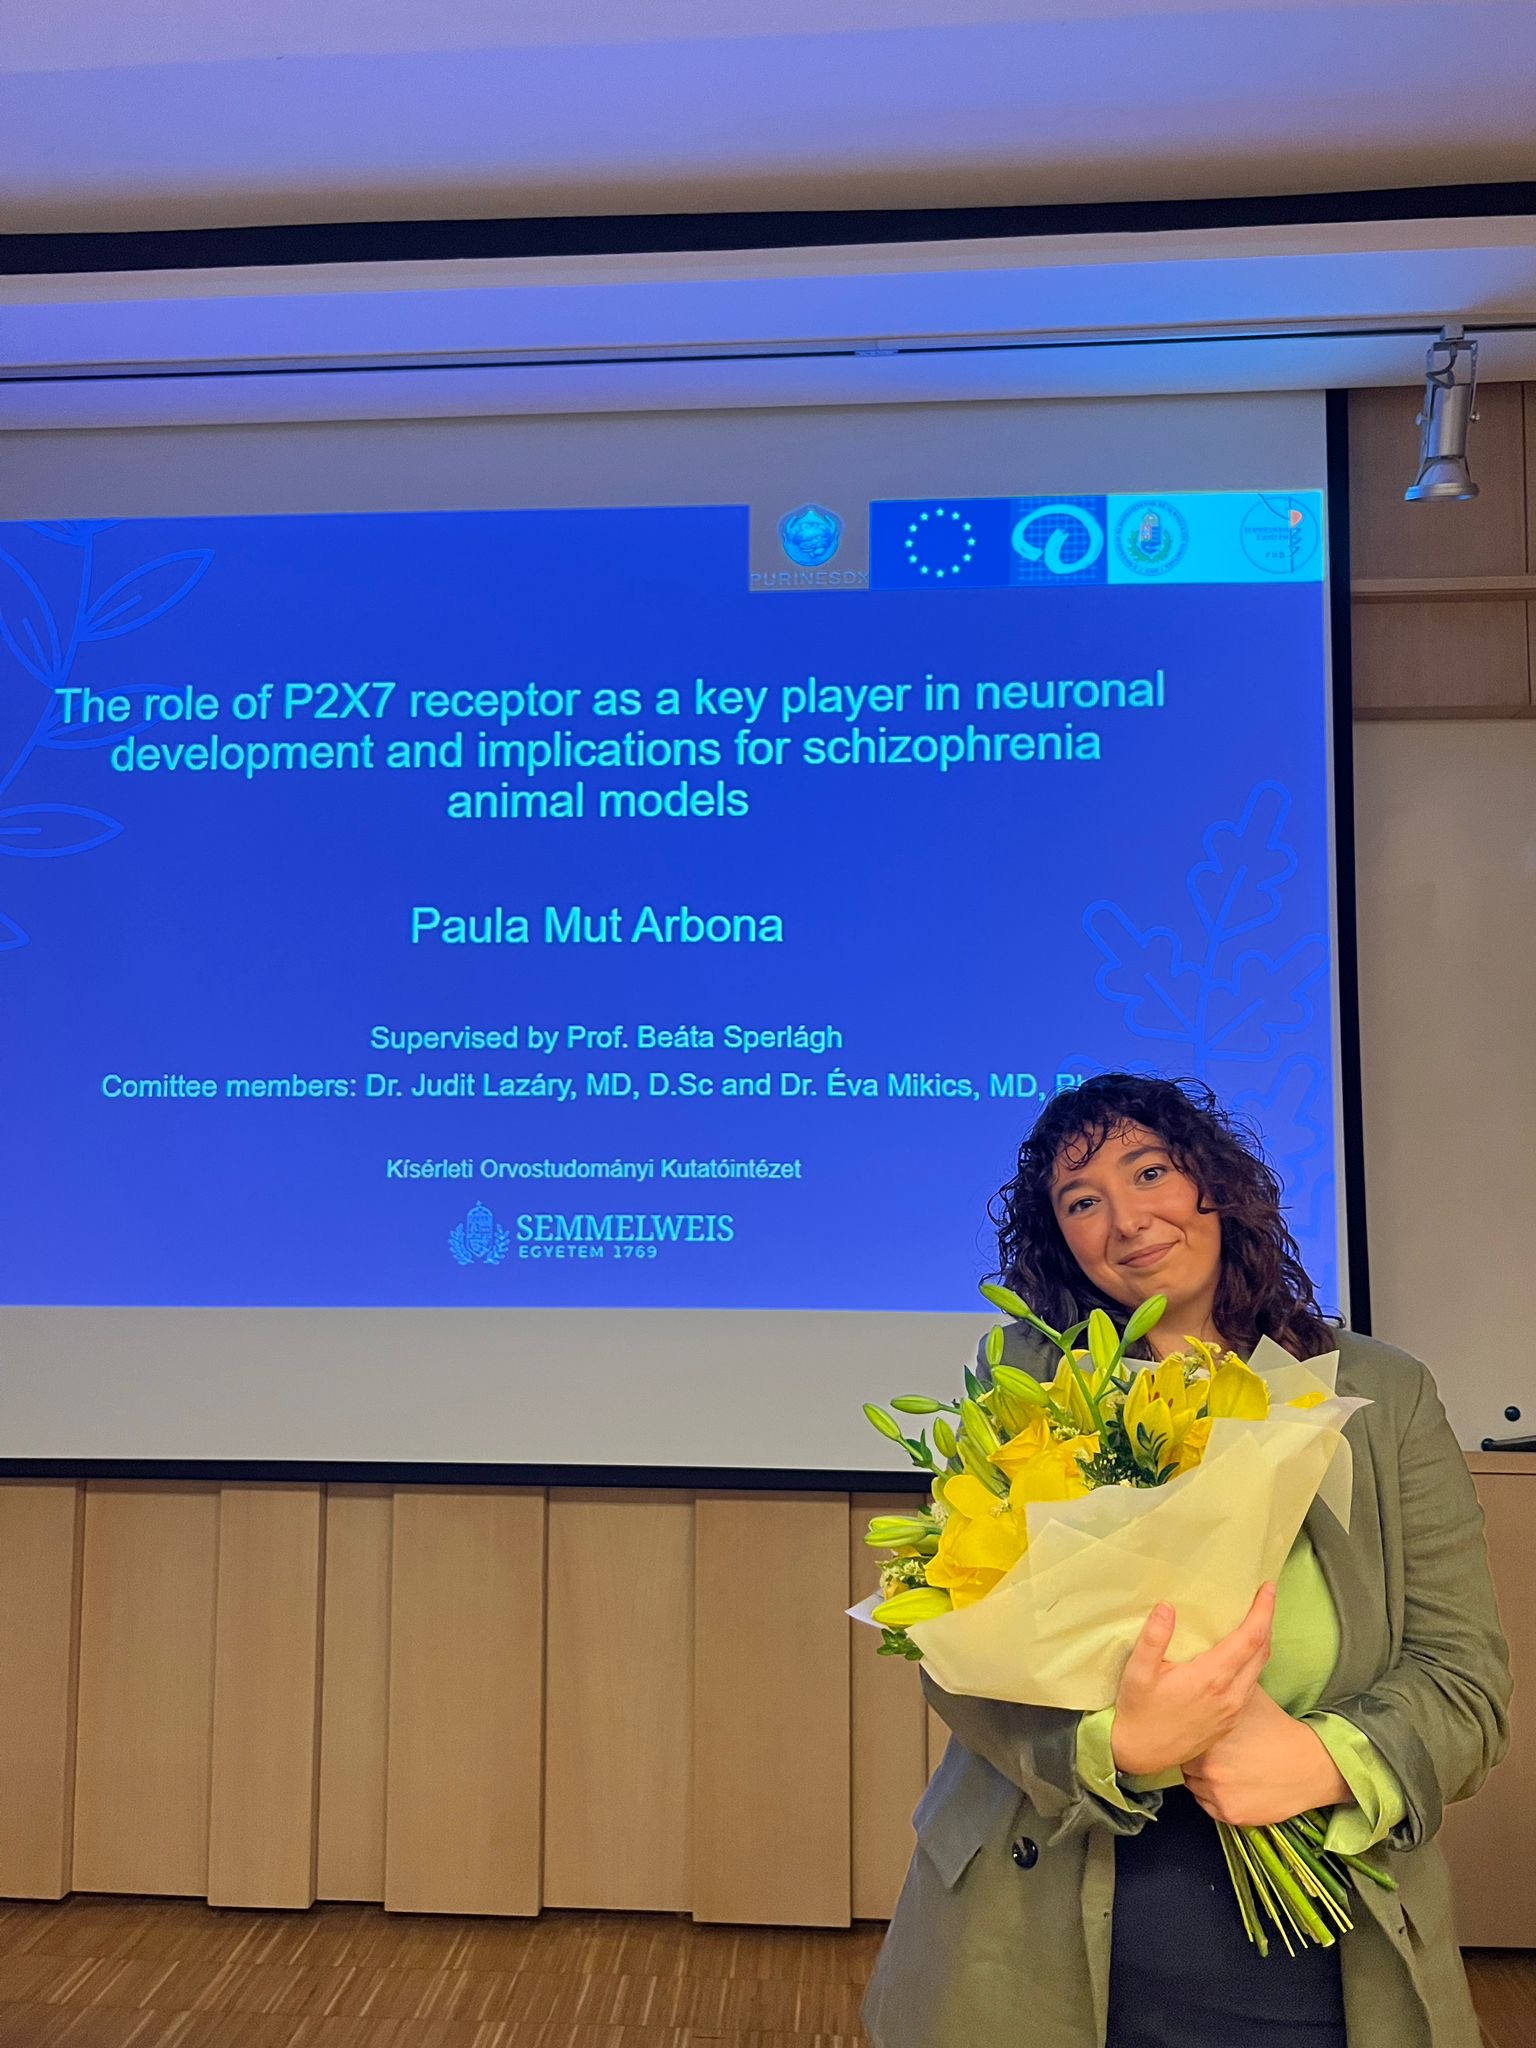 Paula Mut Arbona, member of our group, successfully defended her PhD Thesis diakép